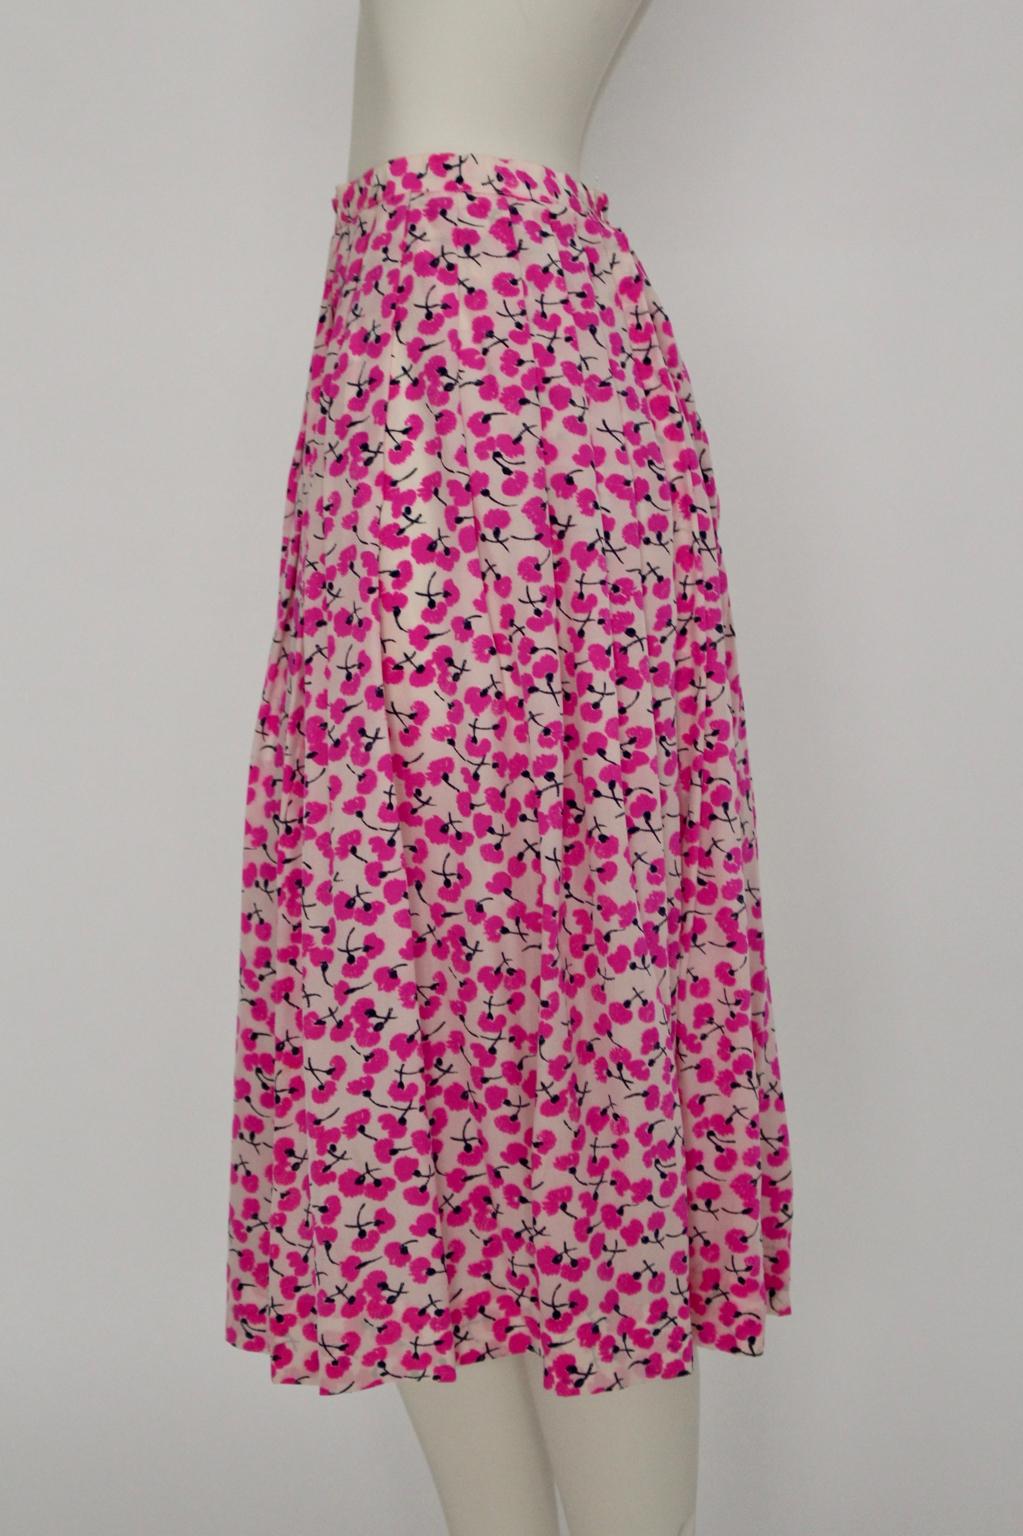 This vintage midi skirt with pleats has an all over print with pink flowers.

Zip Closure with one hook
The skirt is not underlined.
Made in France
Material: 100 % Silk
French size: 42 best for small / medium
